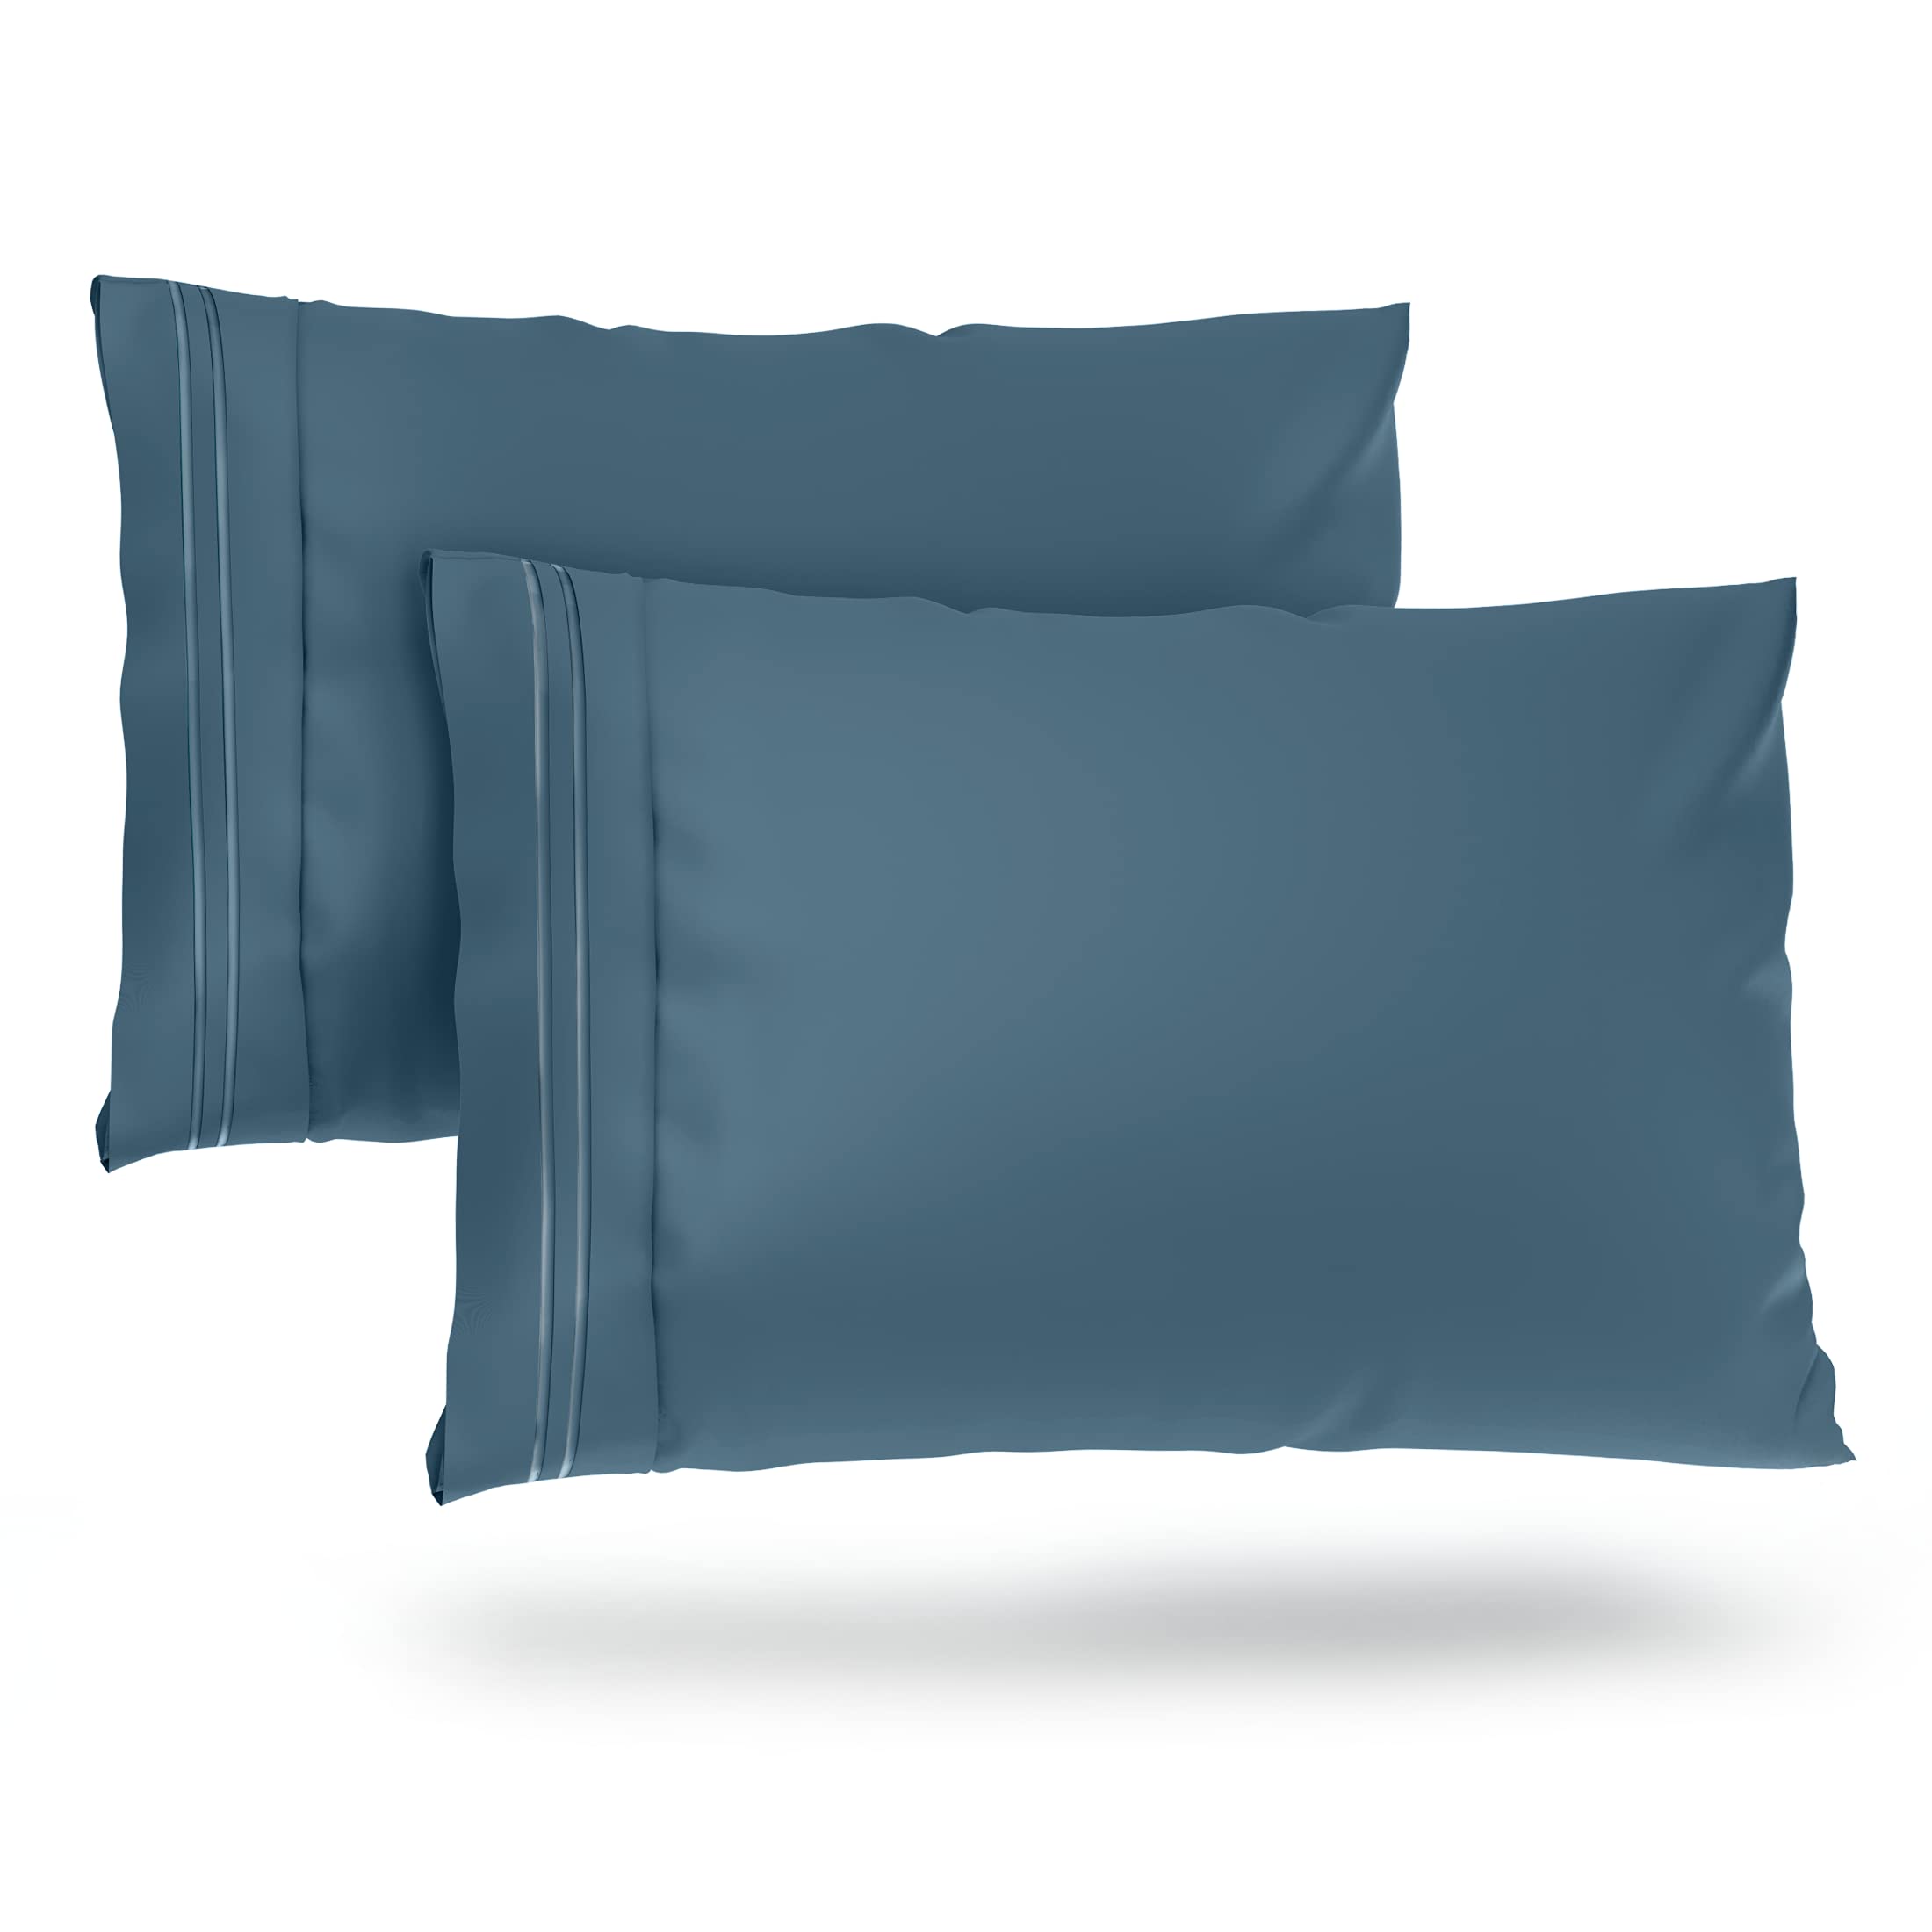 Book Cover Cosy House Collection Pillowcases King Size - Peacock Blue Luxury Pillow Case Set of 2 - Premium Super Soft Hotel Quality Pillow Protector Cover - Cool & Wrinkle Free - Hypoallergenic